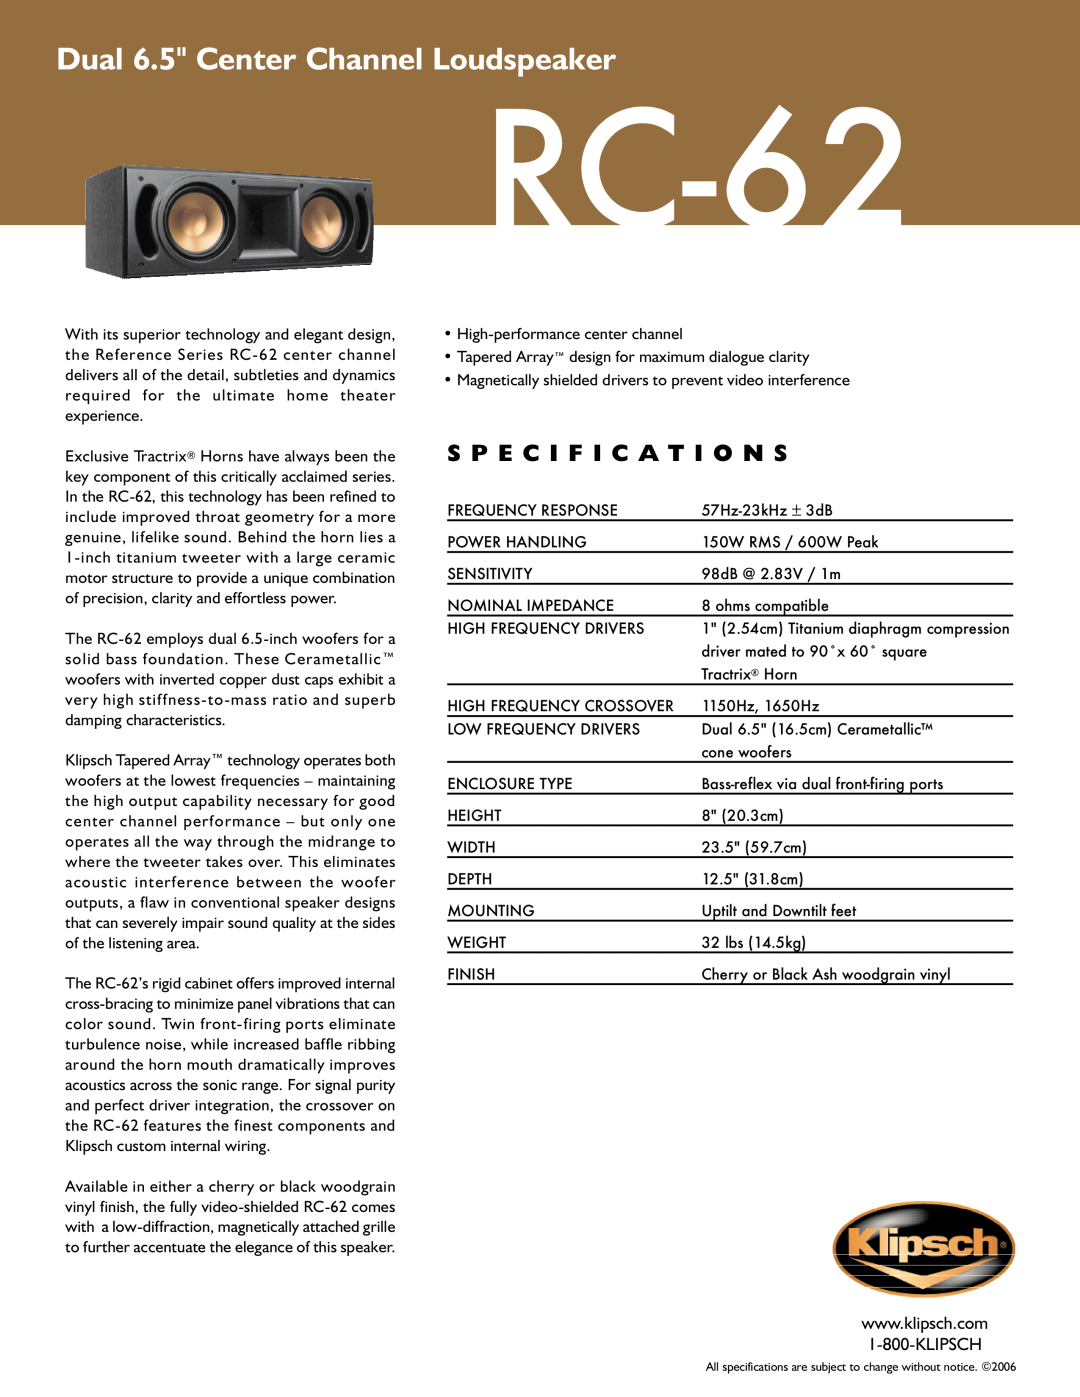 Klipsch RC-62 specifications Dual 6.5 Center Channel Loudspeaker, S P E C I F I C A T I O N S 